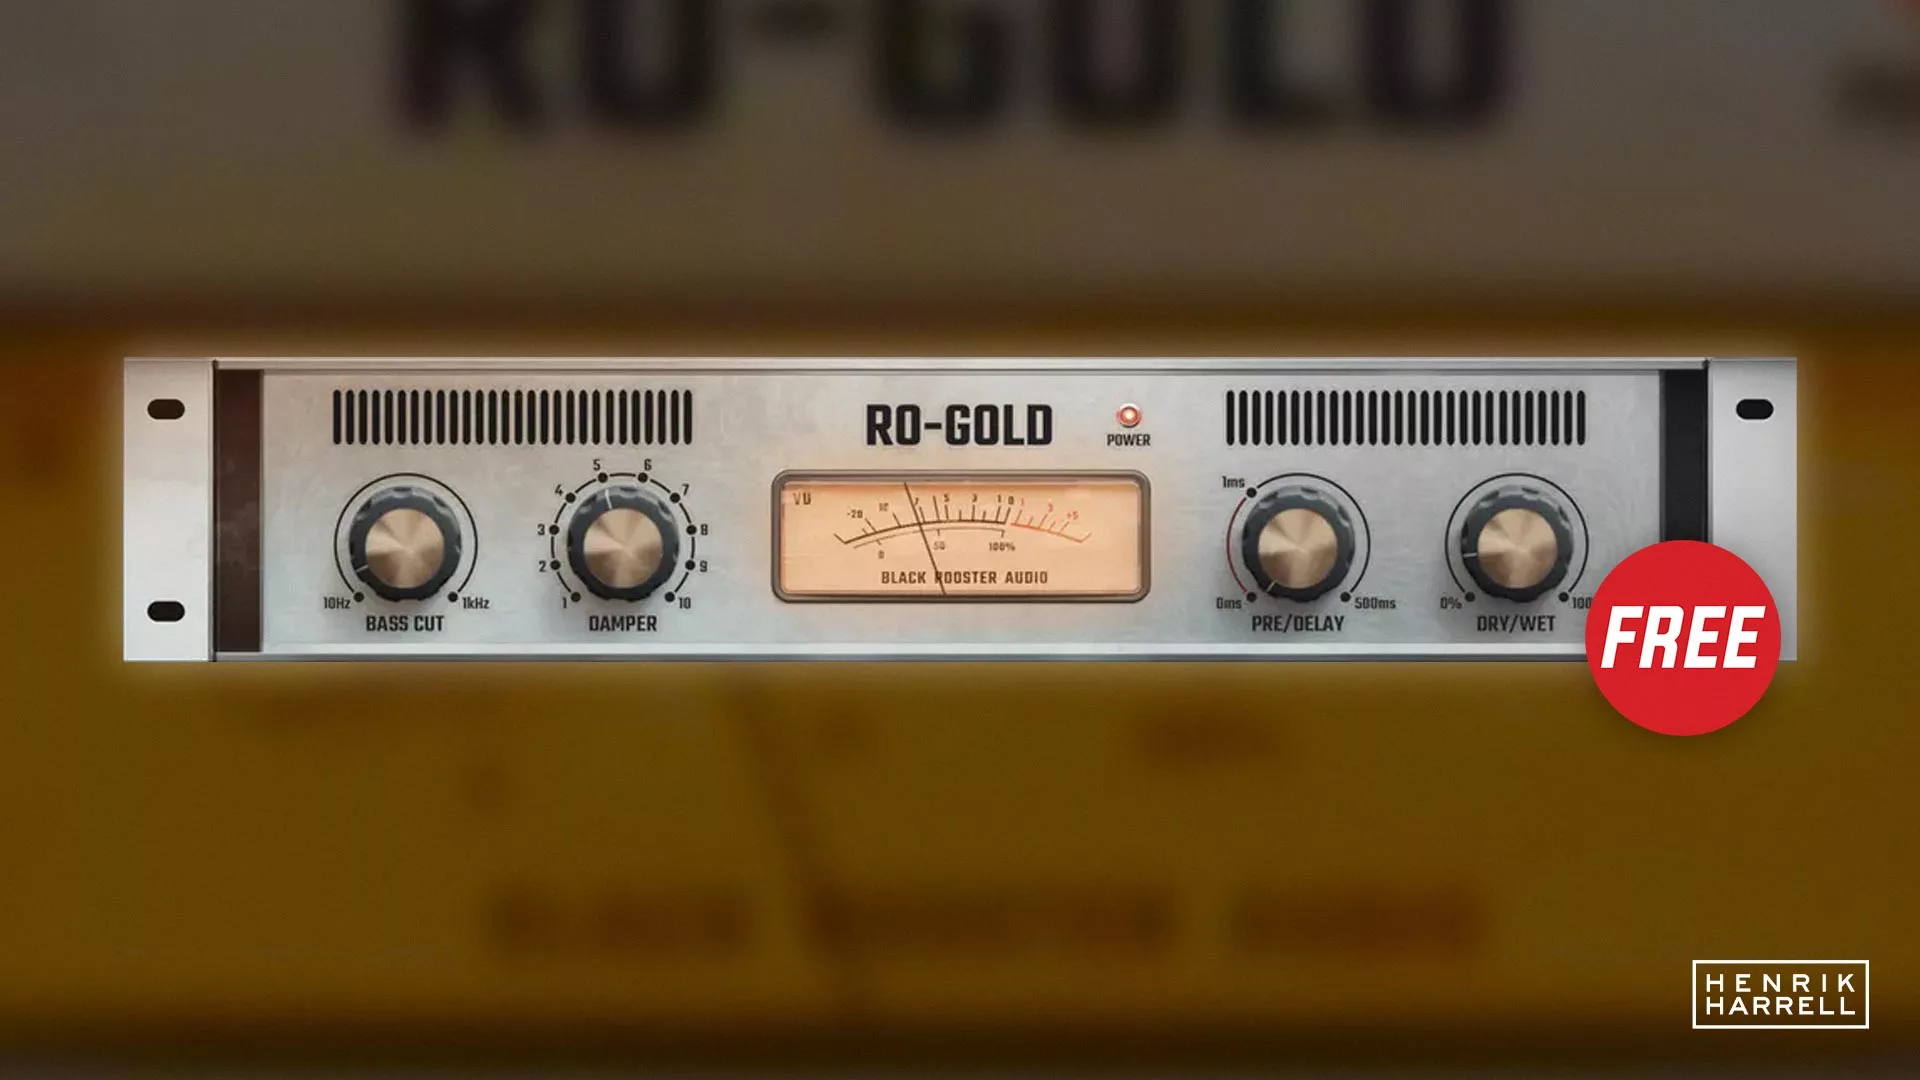 Black Rooster Audio Released “Ro-Gold”: A Free Vintage Gold-Plate Reverb Plugin